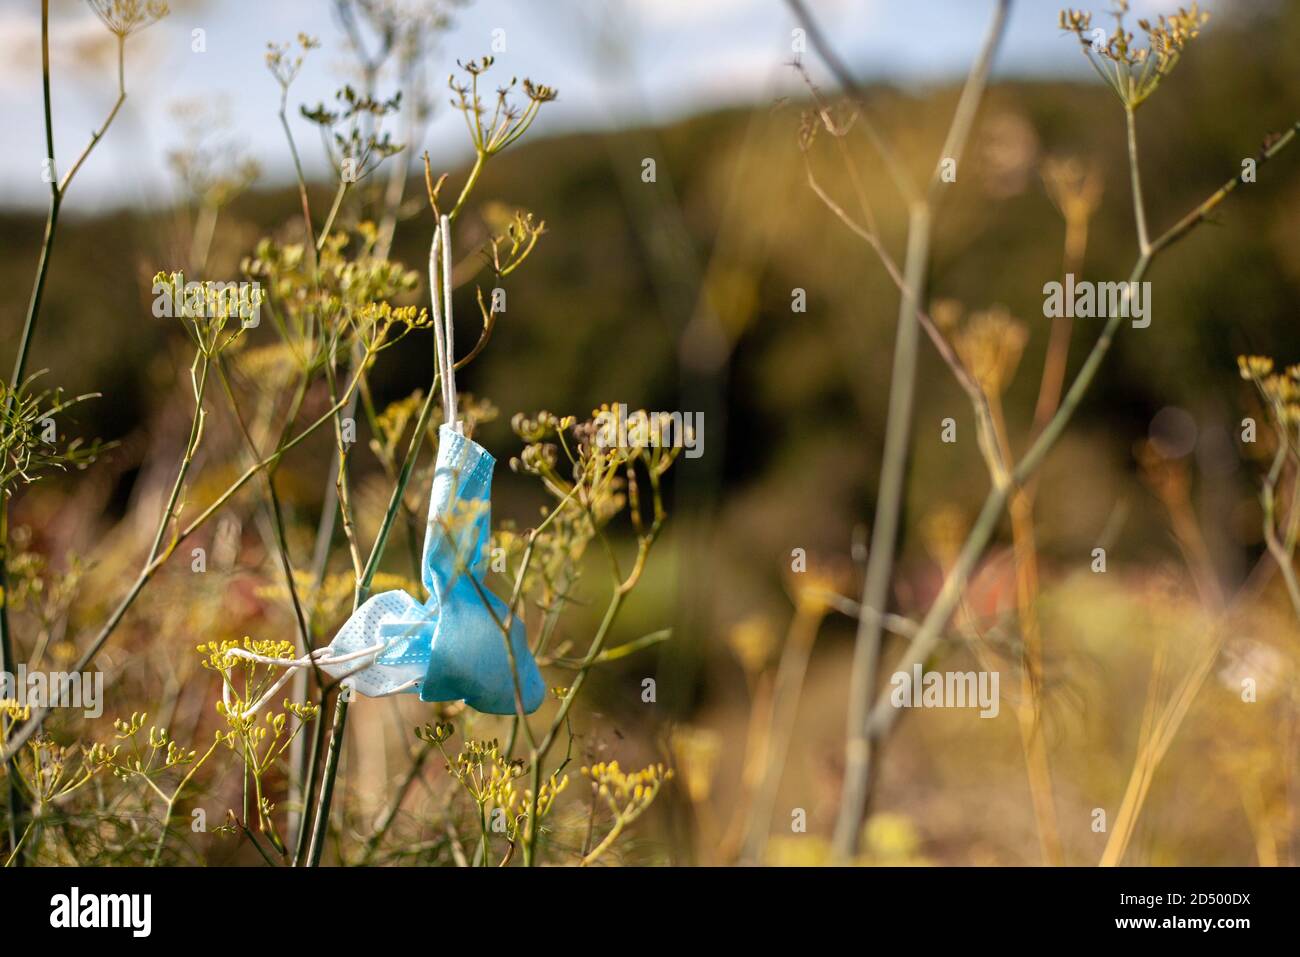 Medical face mask thrown away hanging from tall grass in the sun. Trash rubbish litter pandemic coronavirus Covid-19 environment impact. Stock Photo